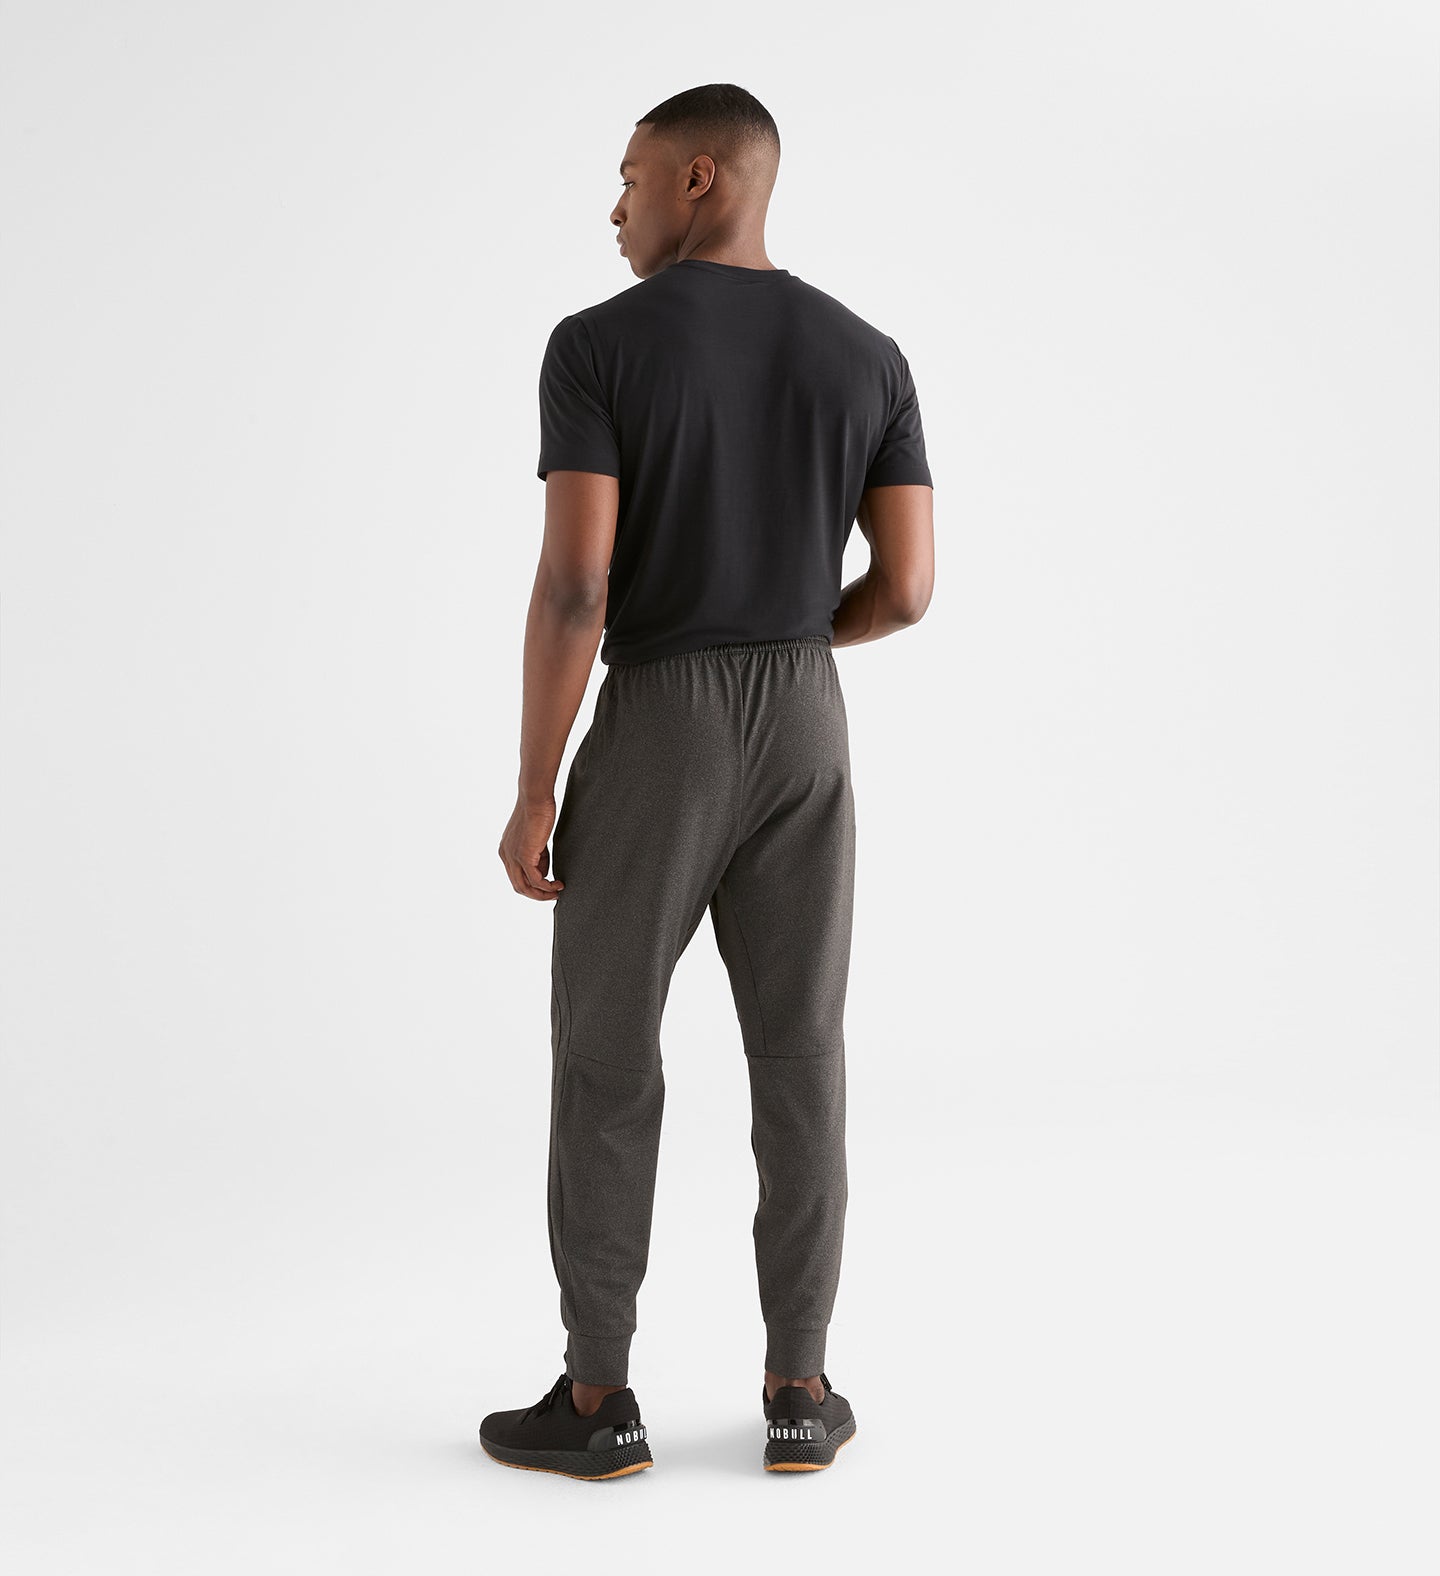 The Best Under-$35 Joggers at , According to Customers